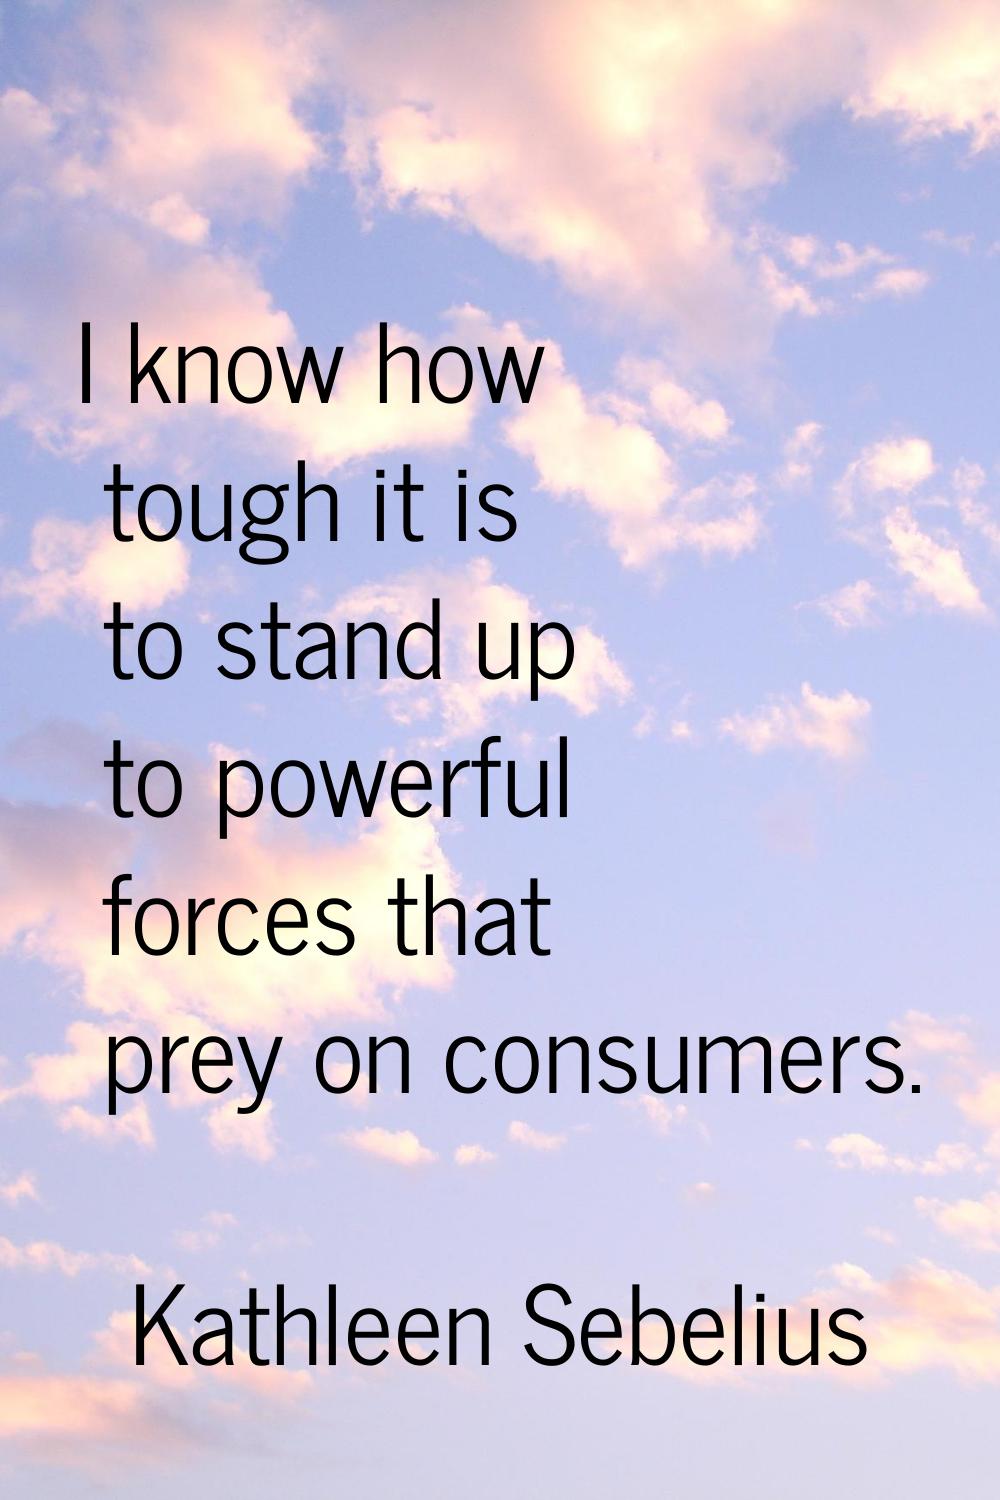 I know how tough it is to stand up to powerful forces that prey on consumers.